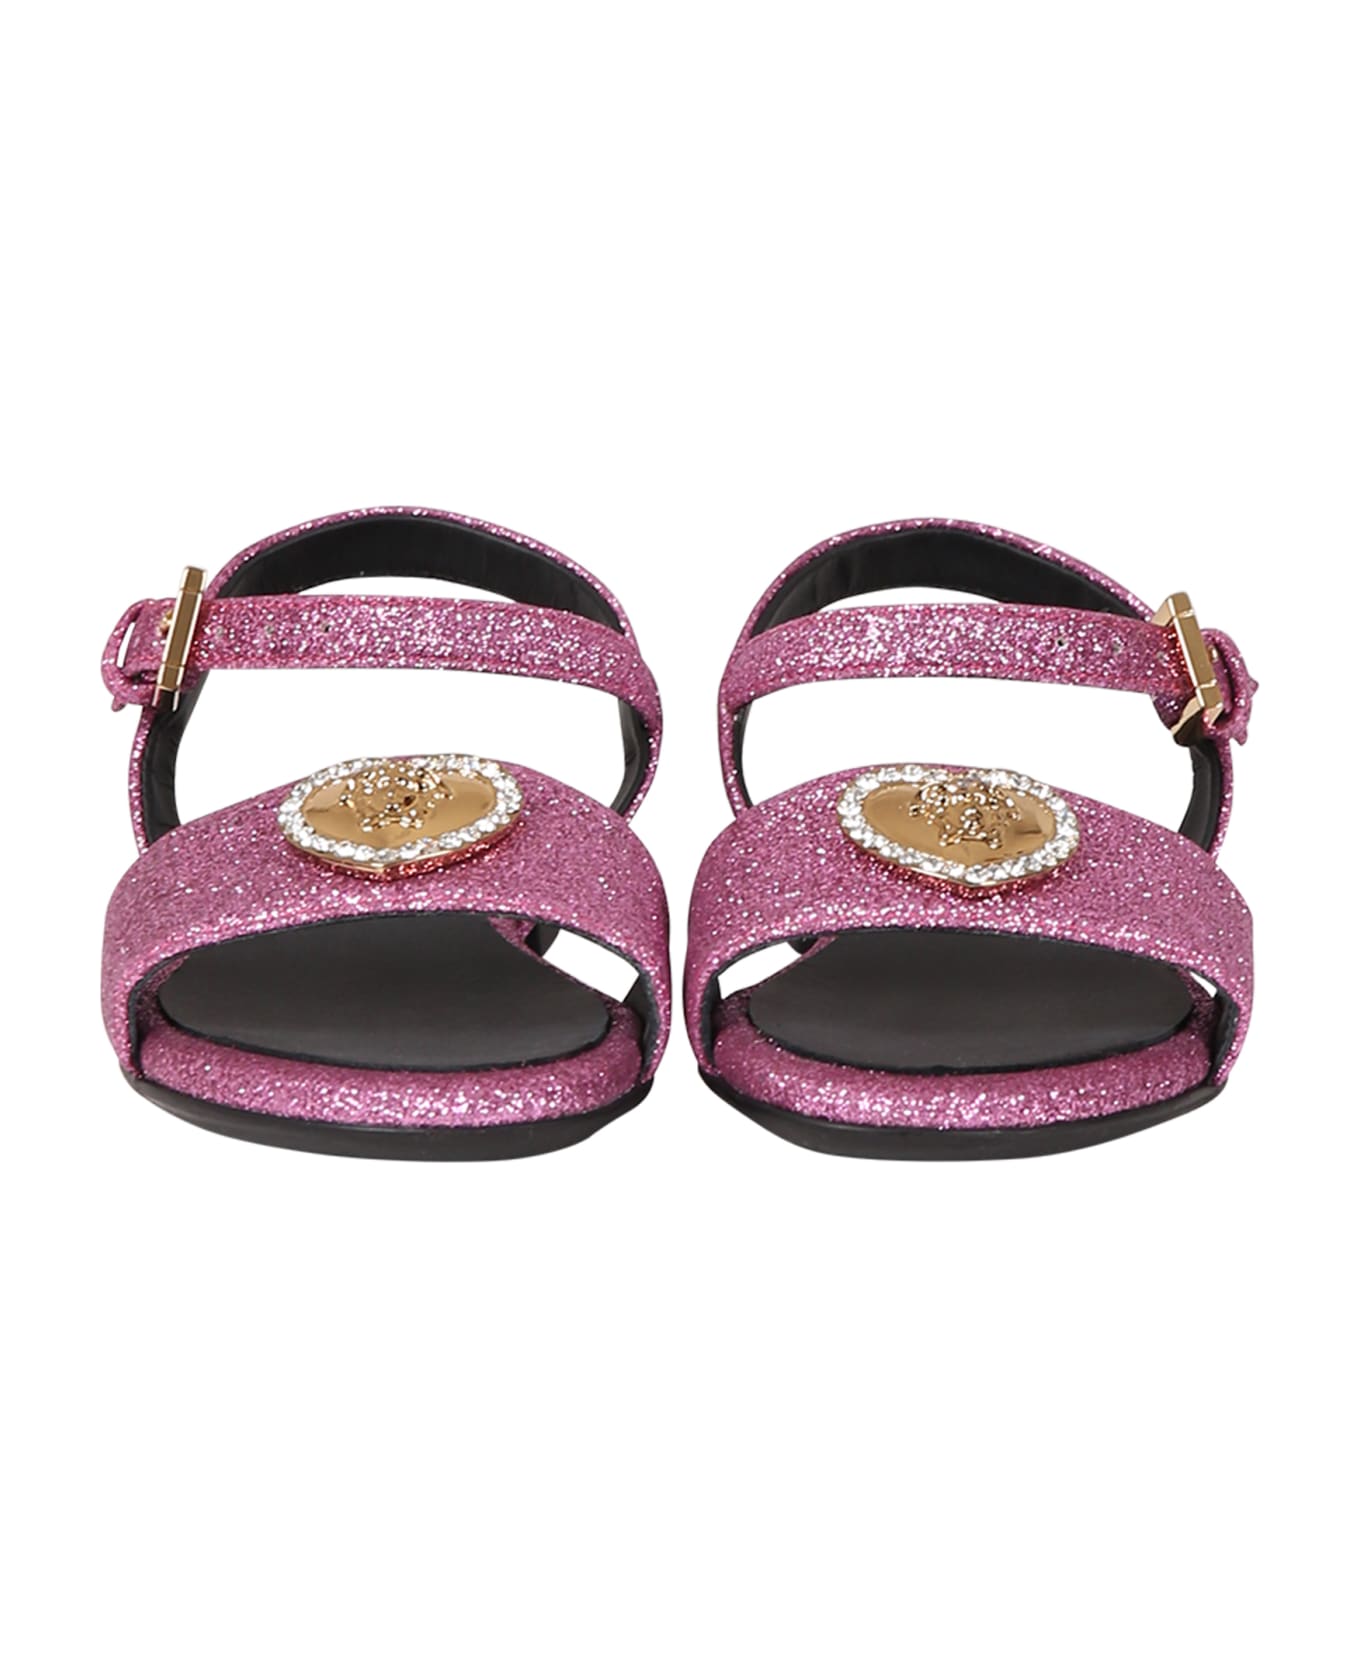 Versace Fuchsia Sandals For Girl With Medusa And Crystals - Fuchsia